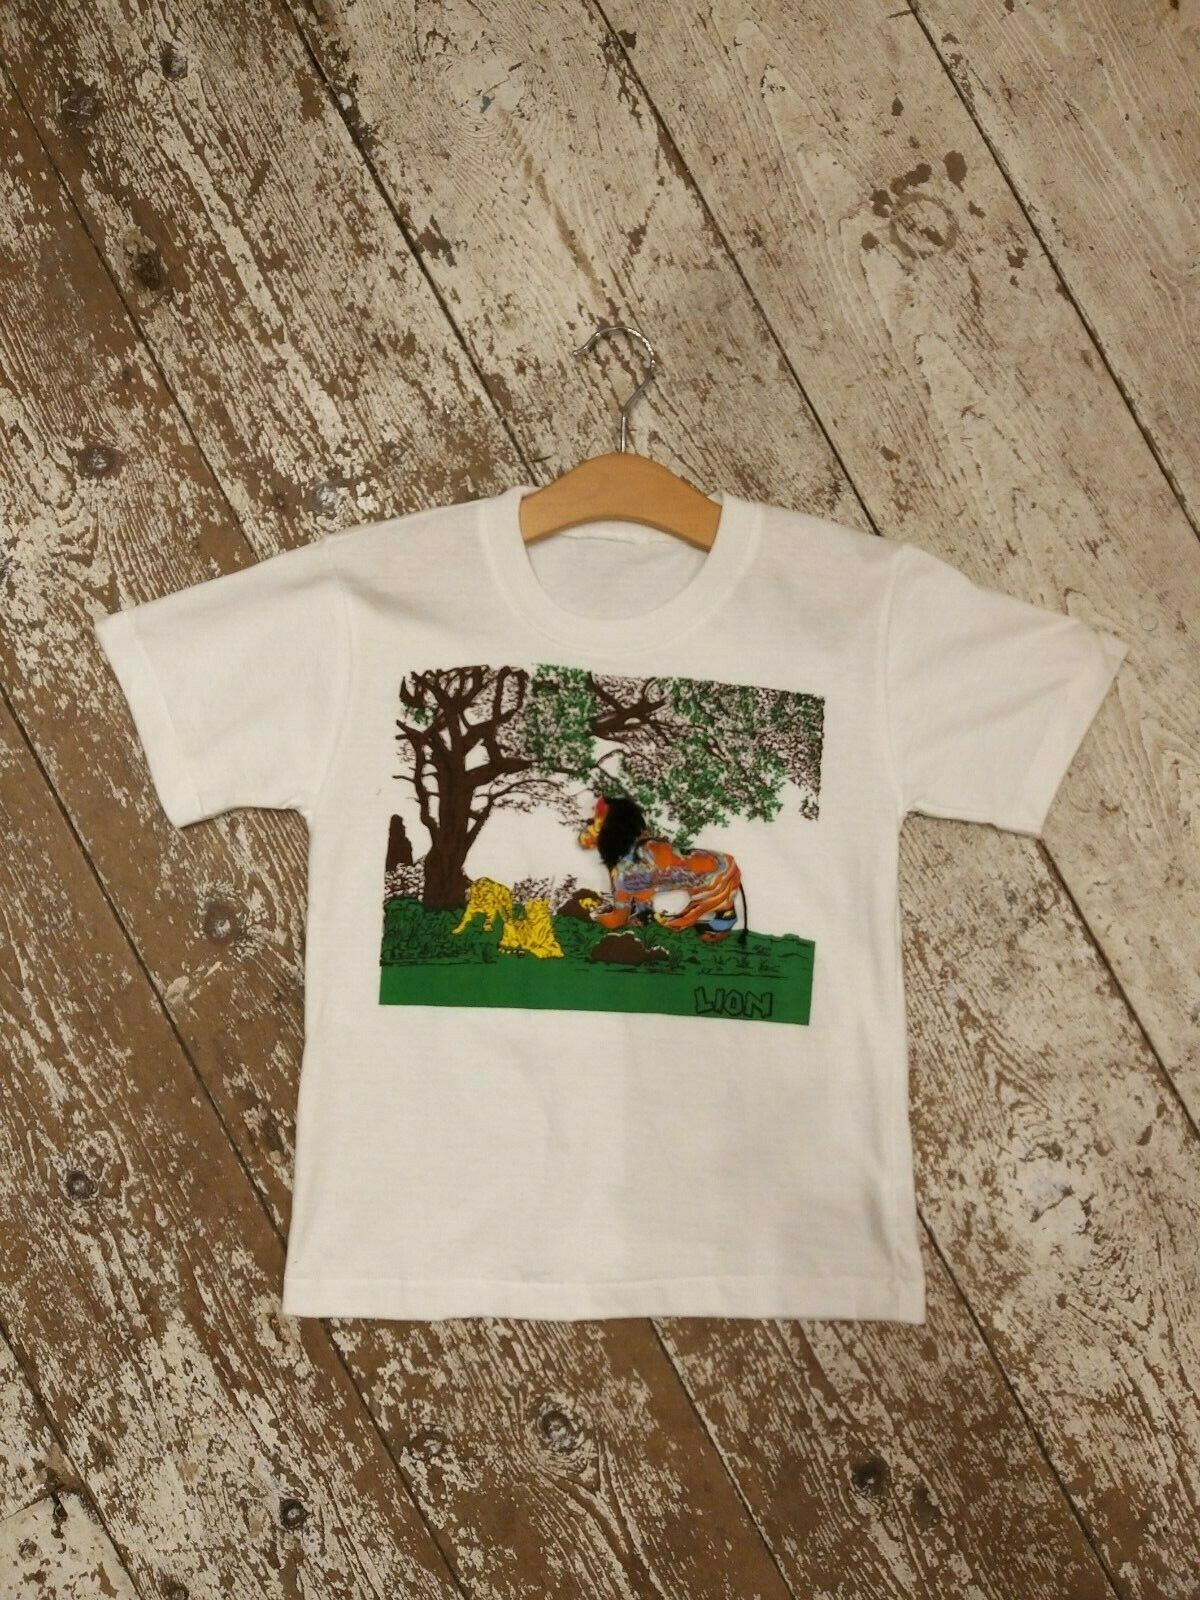 XHX403 Bear Roaming The Forrest Infant Kids T Shirt Cotton Tee Toddler Baby 6-18M